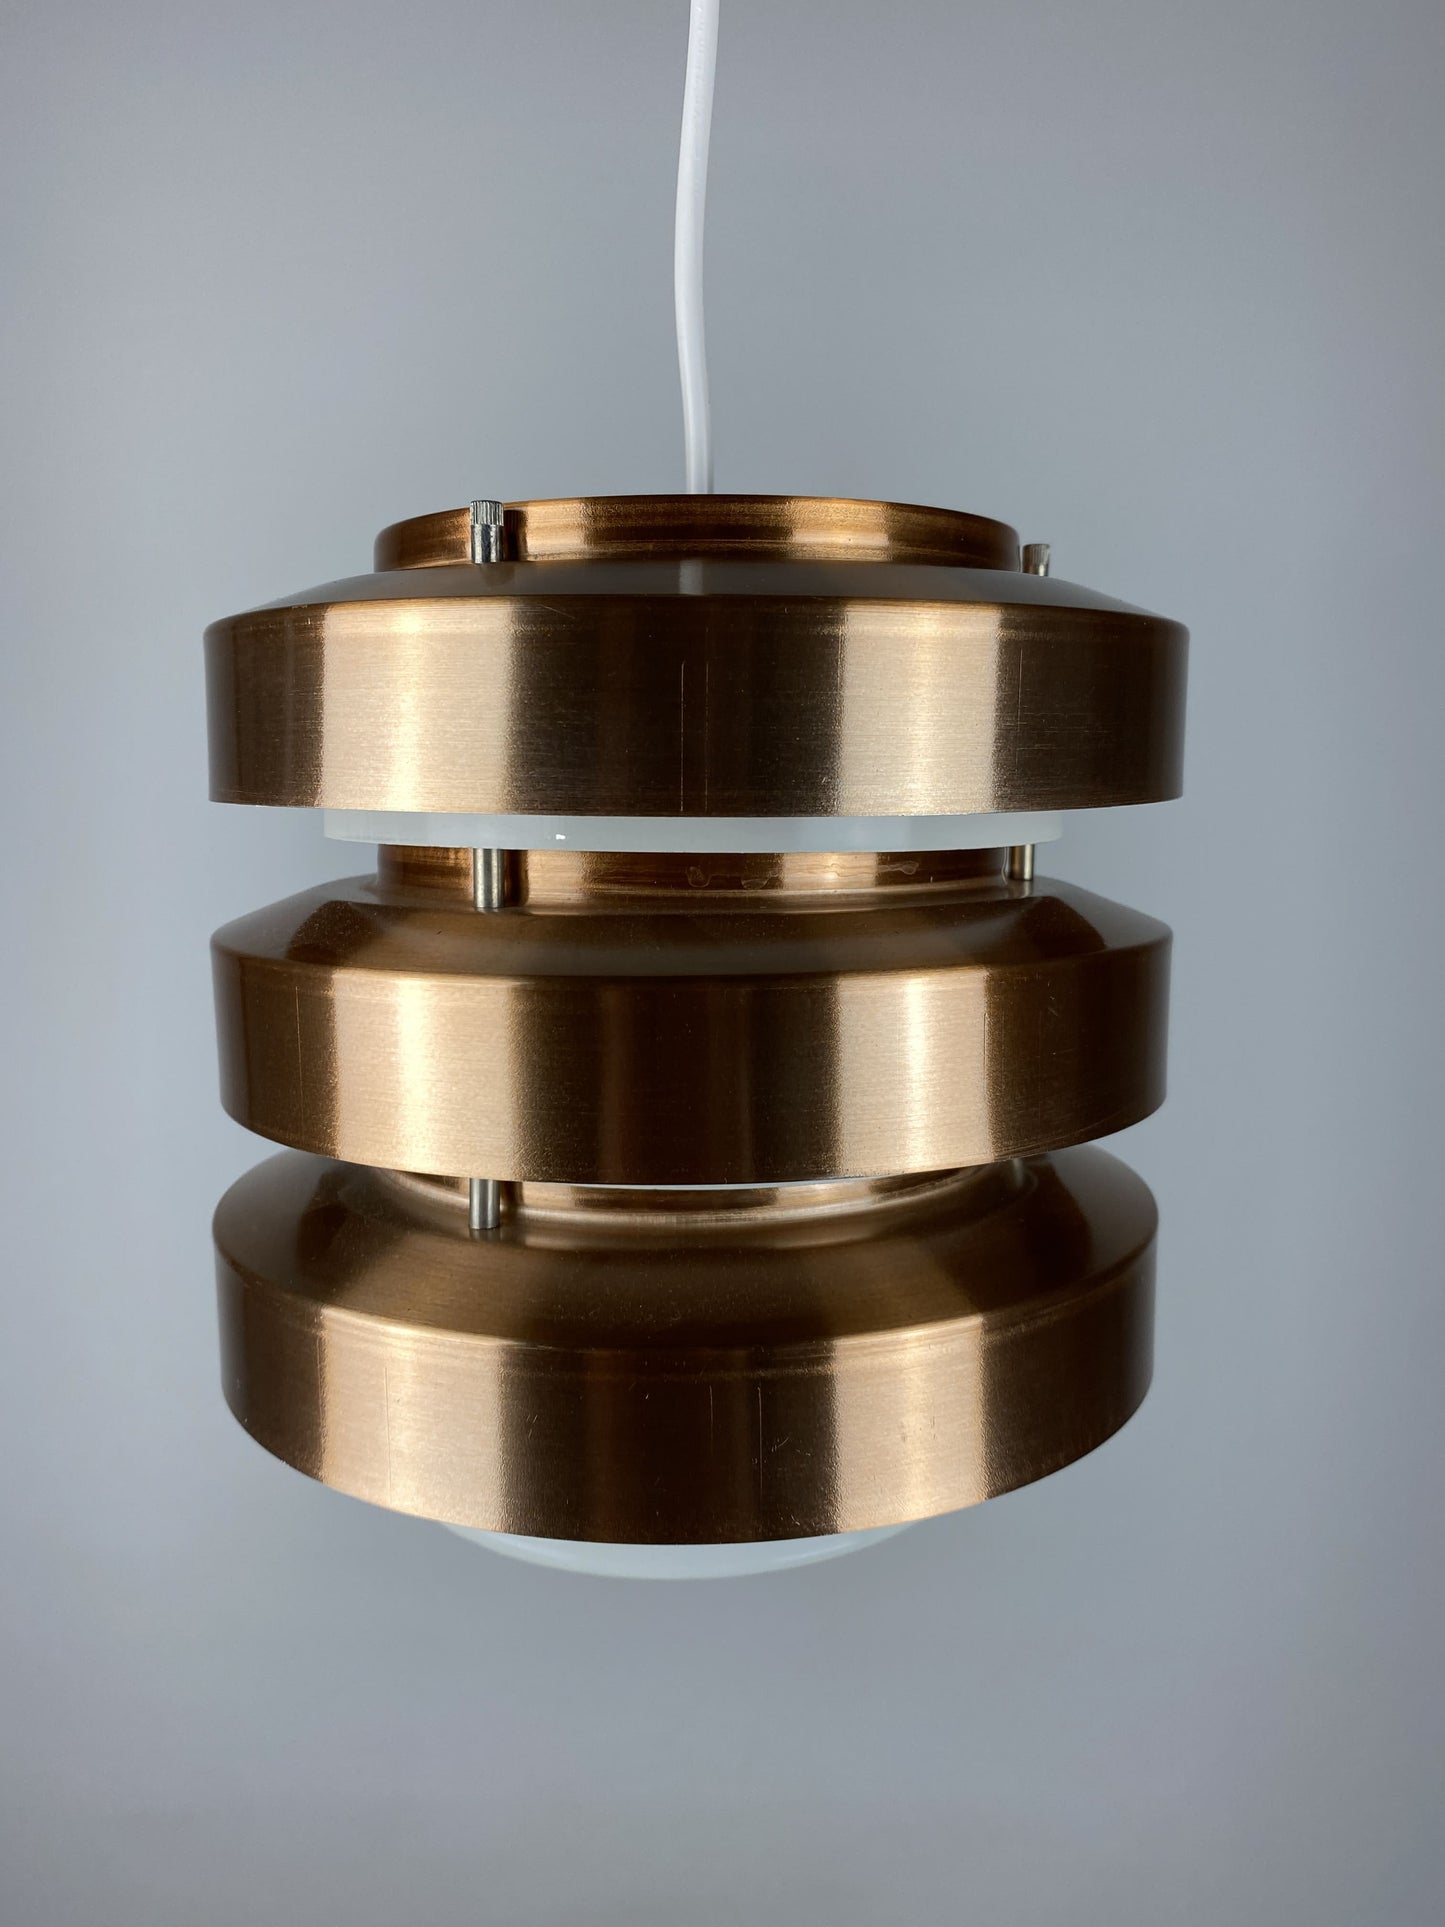 1 of 2 Pendant light made by VEB Metalldrücker Halle from DDR (East-germany) 1970